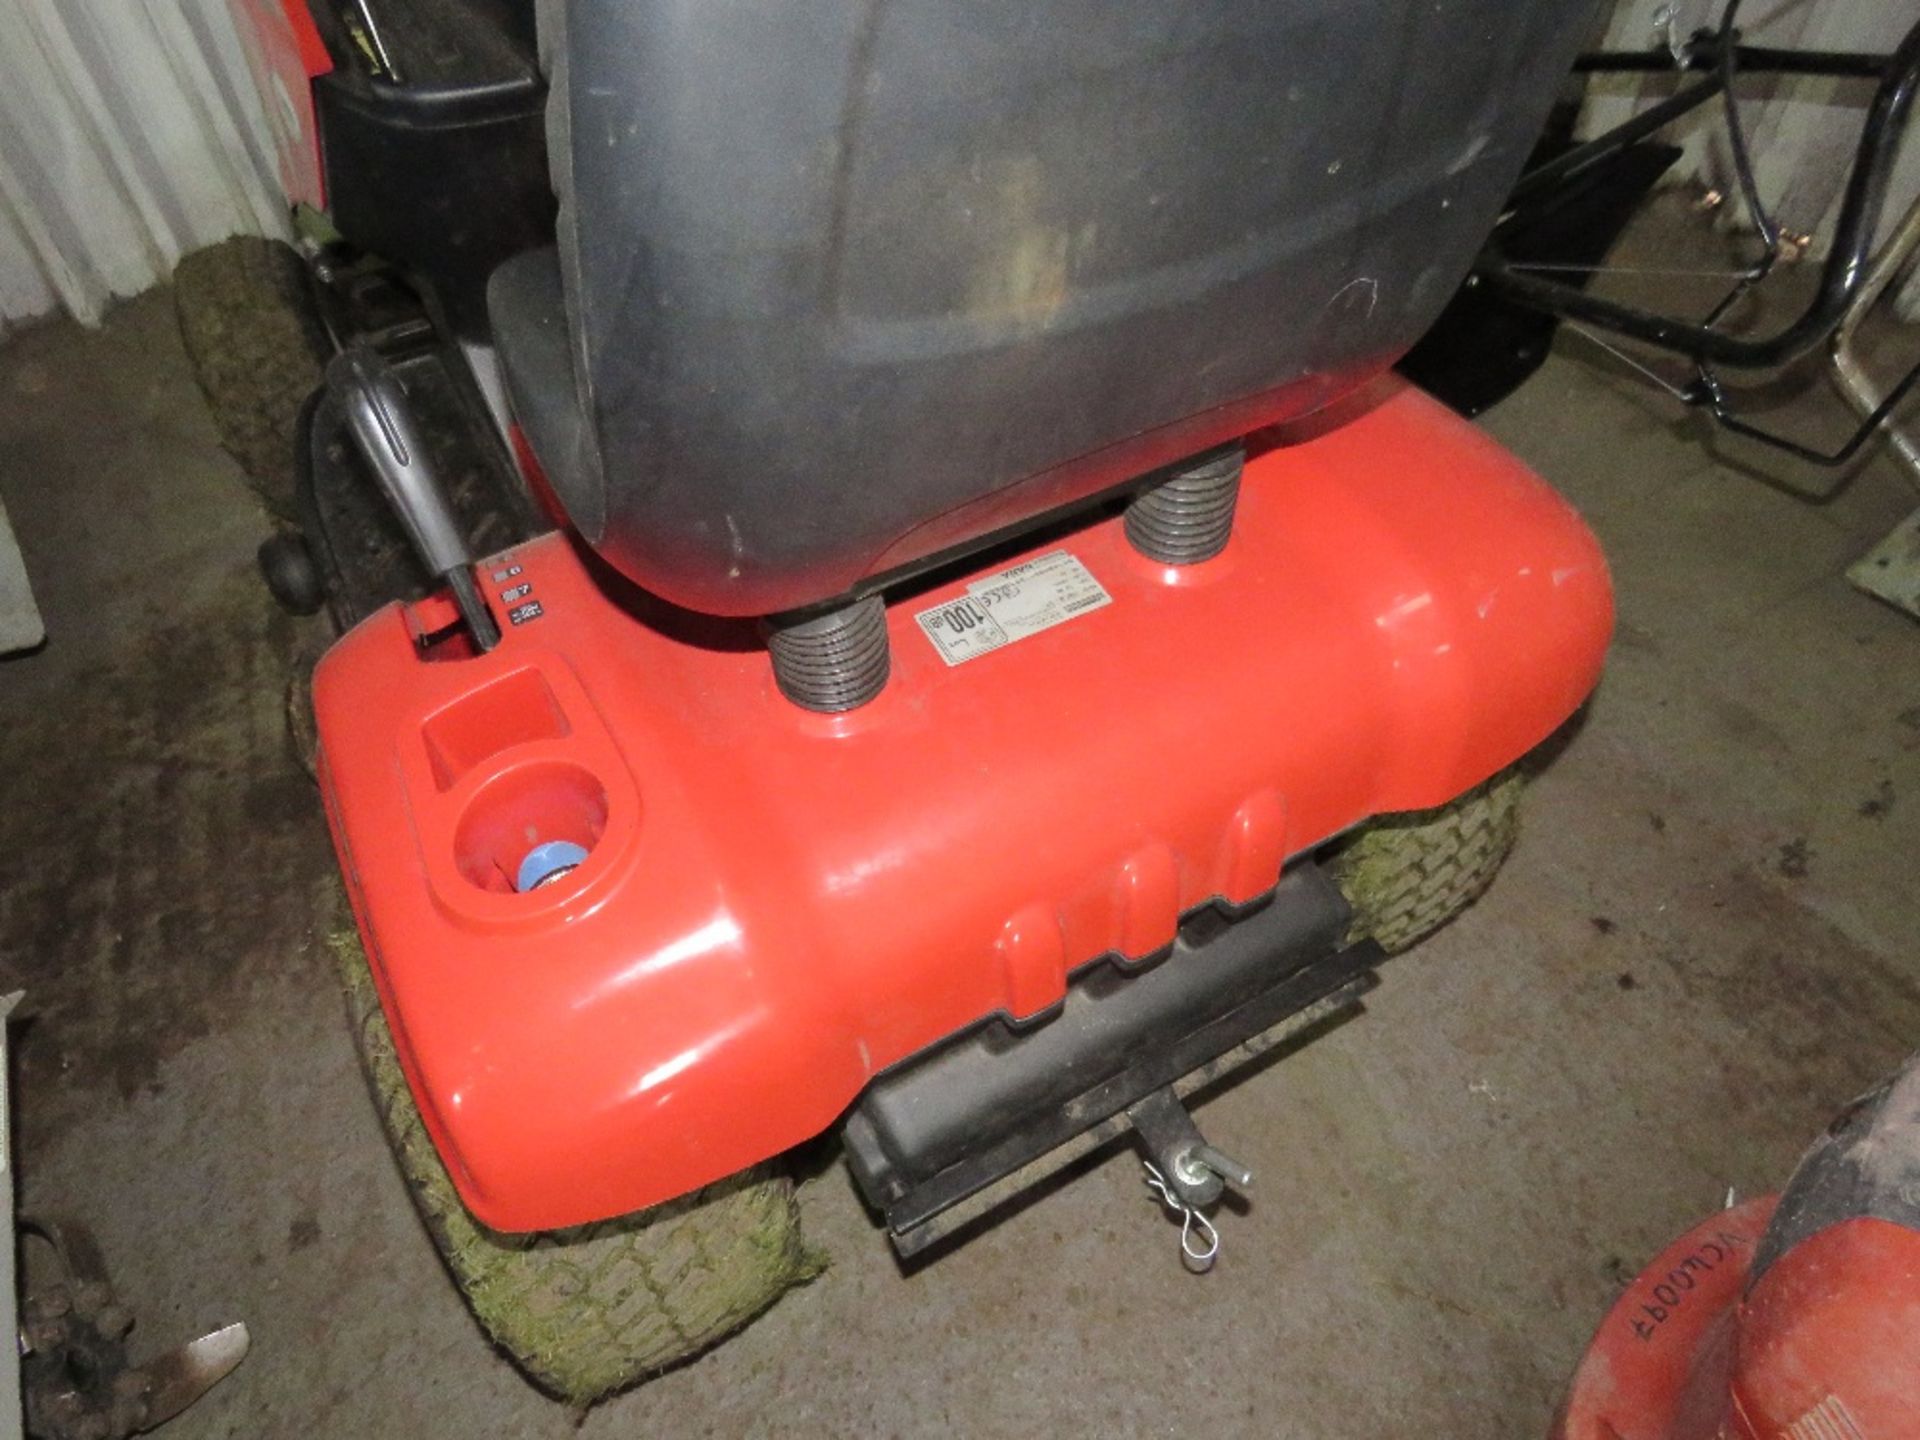 MOUNTFIELD 1538SD RIDE ON MOWER, YEAR 2012, HYDRASTATIC DRIVE. WHEN TESTED WAS SEEN TO RUN BUT WOULD - Image 4 of 5